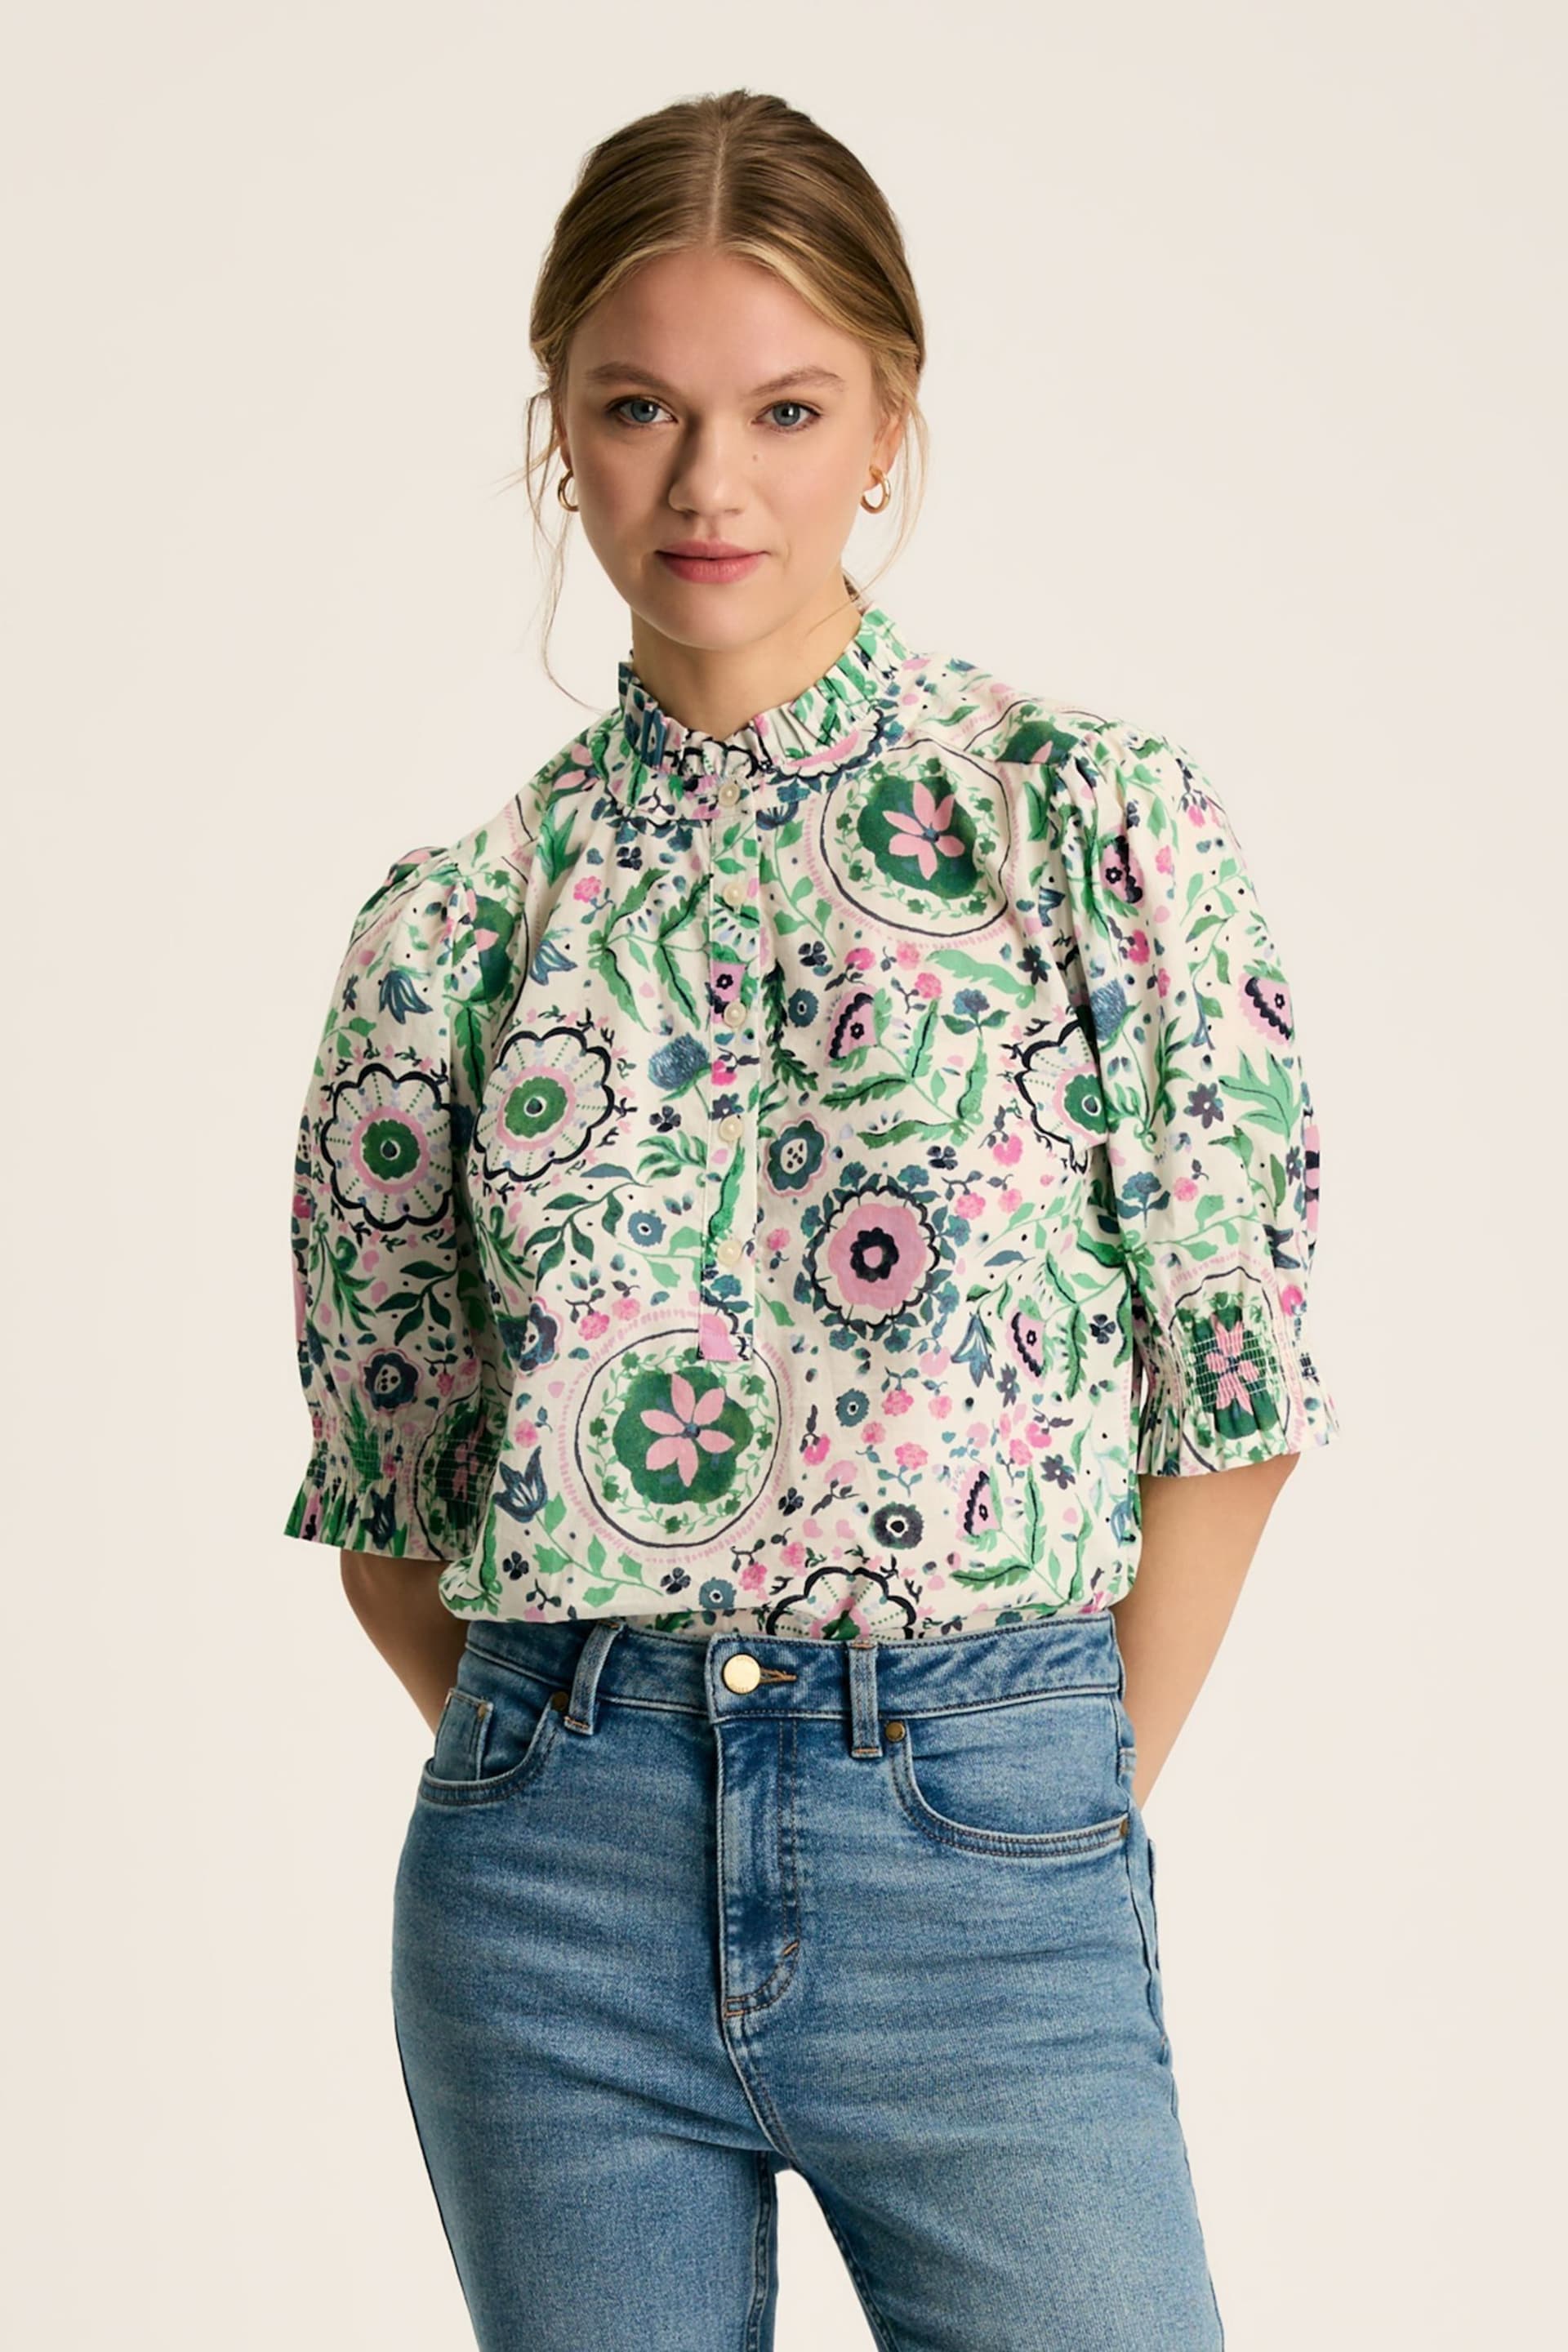 Joules Elle Green/Pink Frill Blouse - Image 1 of 6